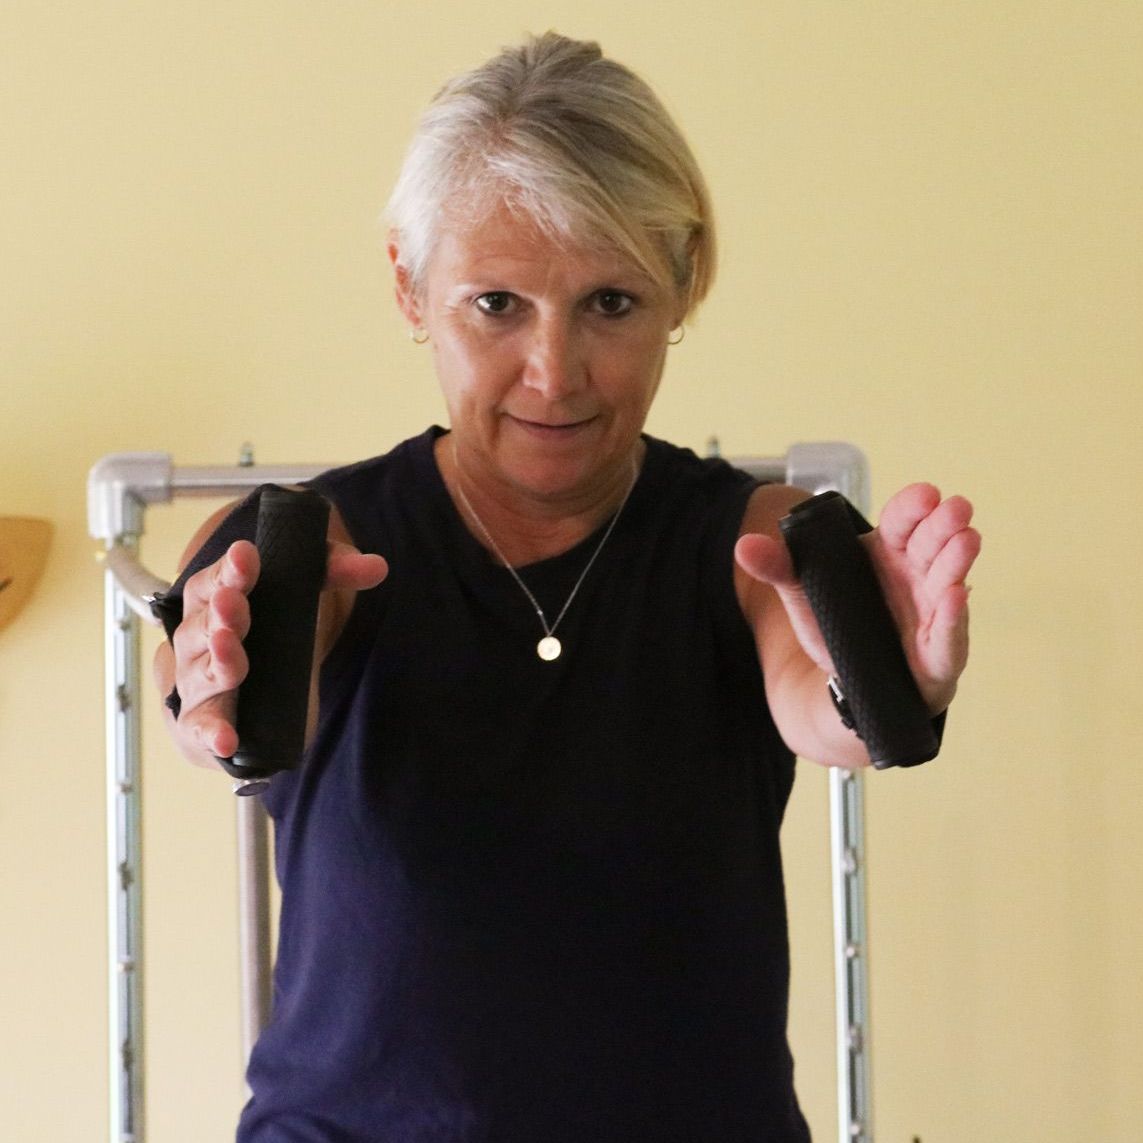 a woman in a black shirt is holding a pair of Pilates bands